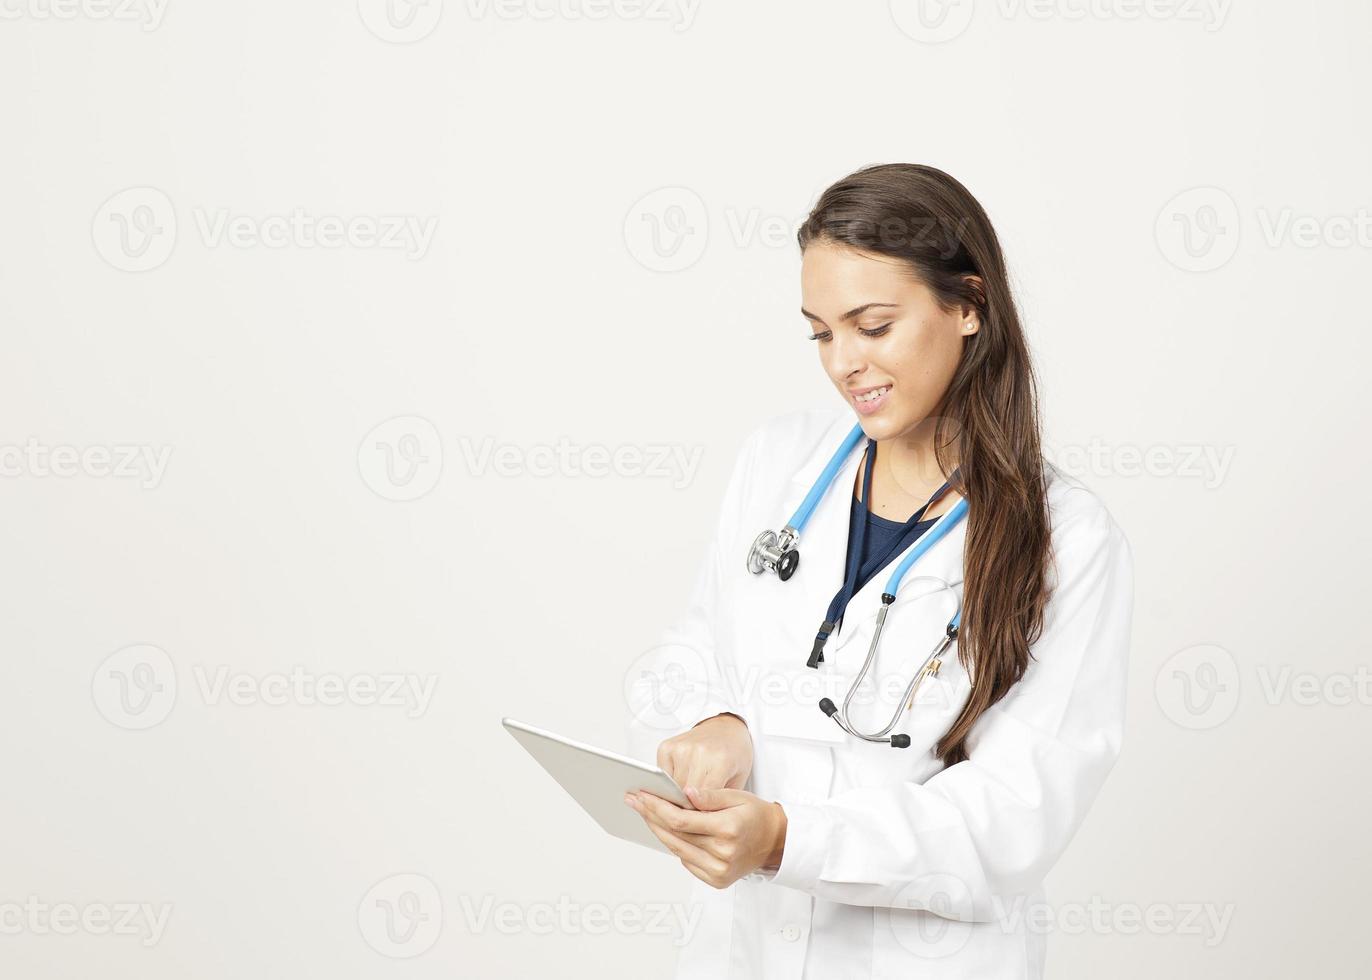 Female doctor standing photo